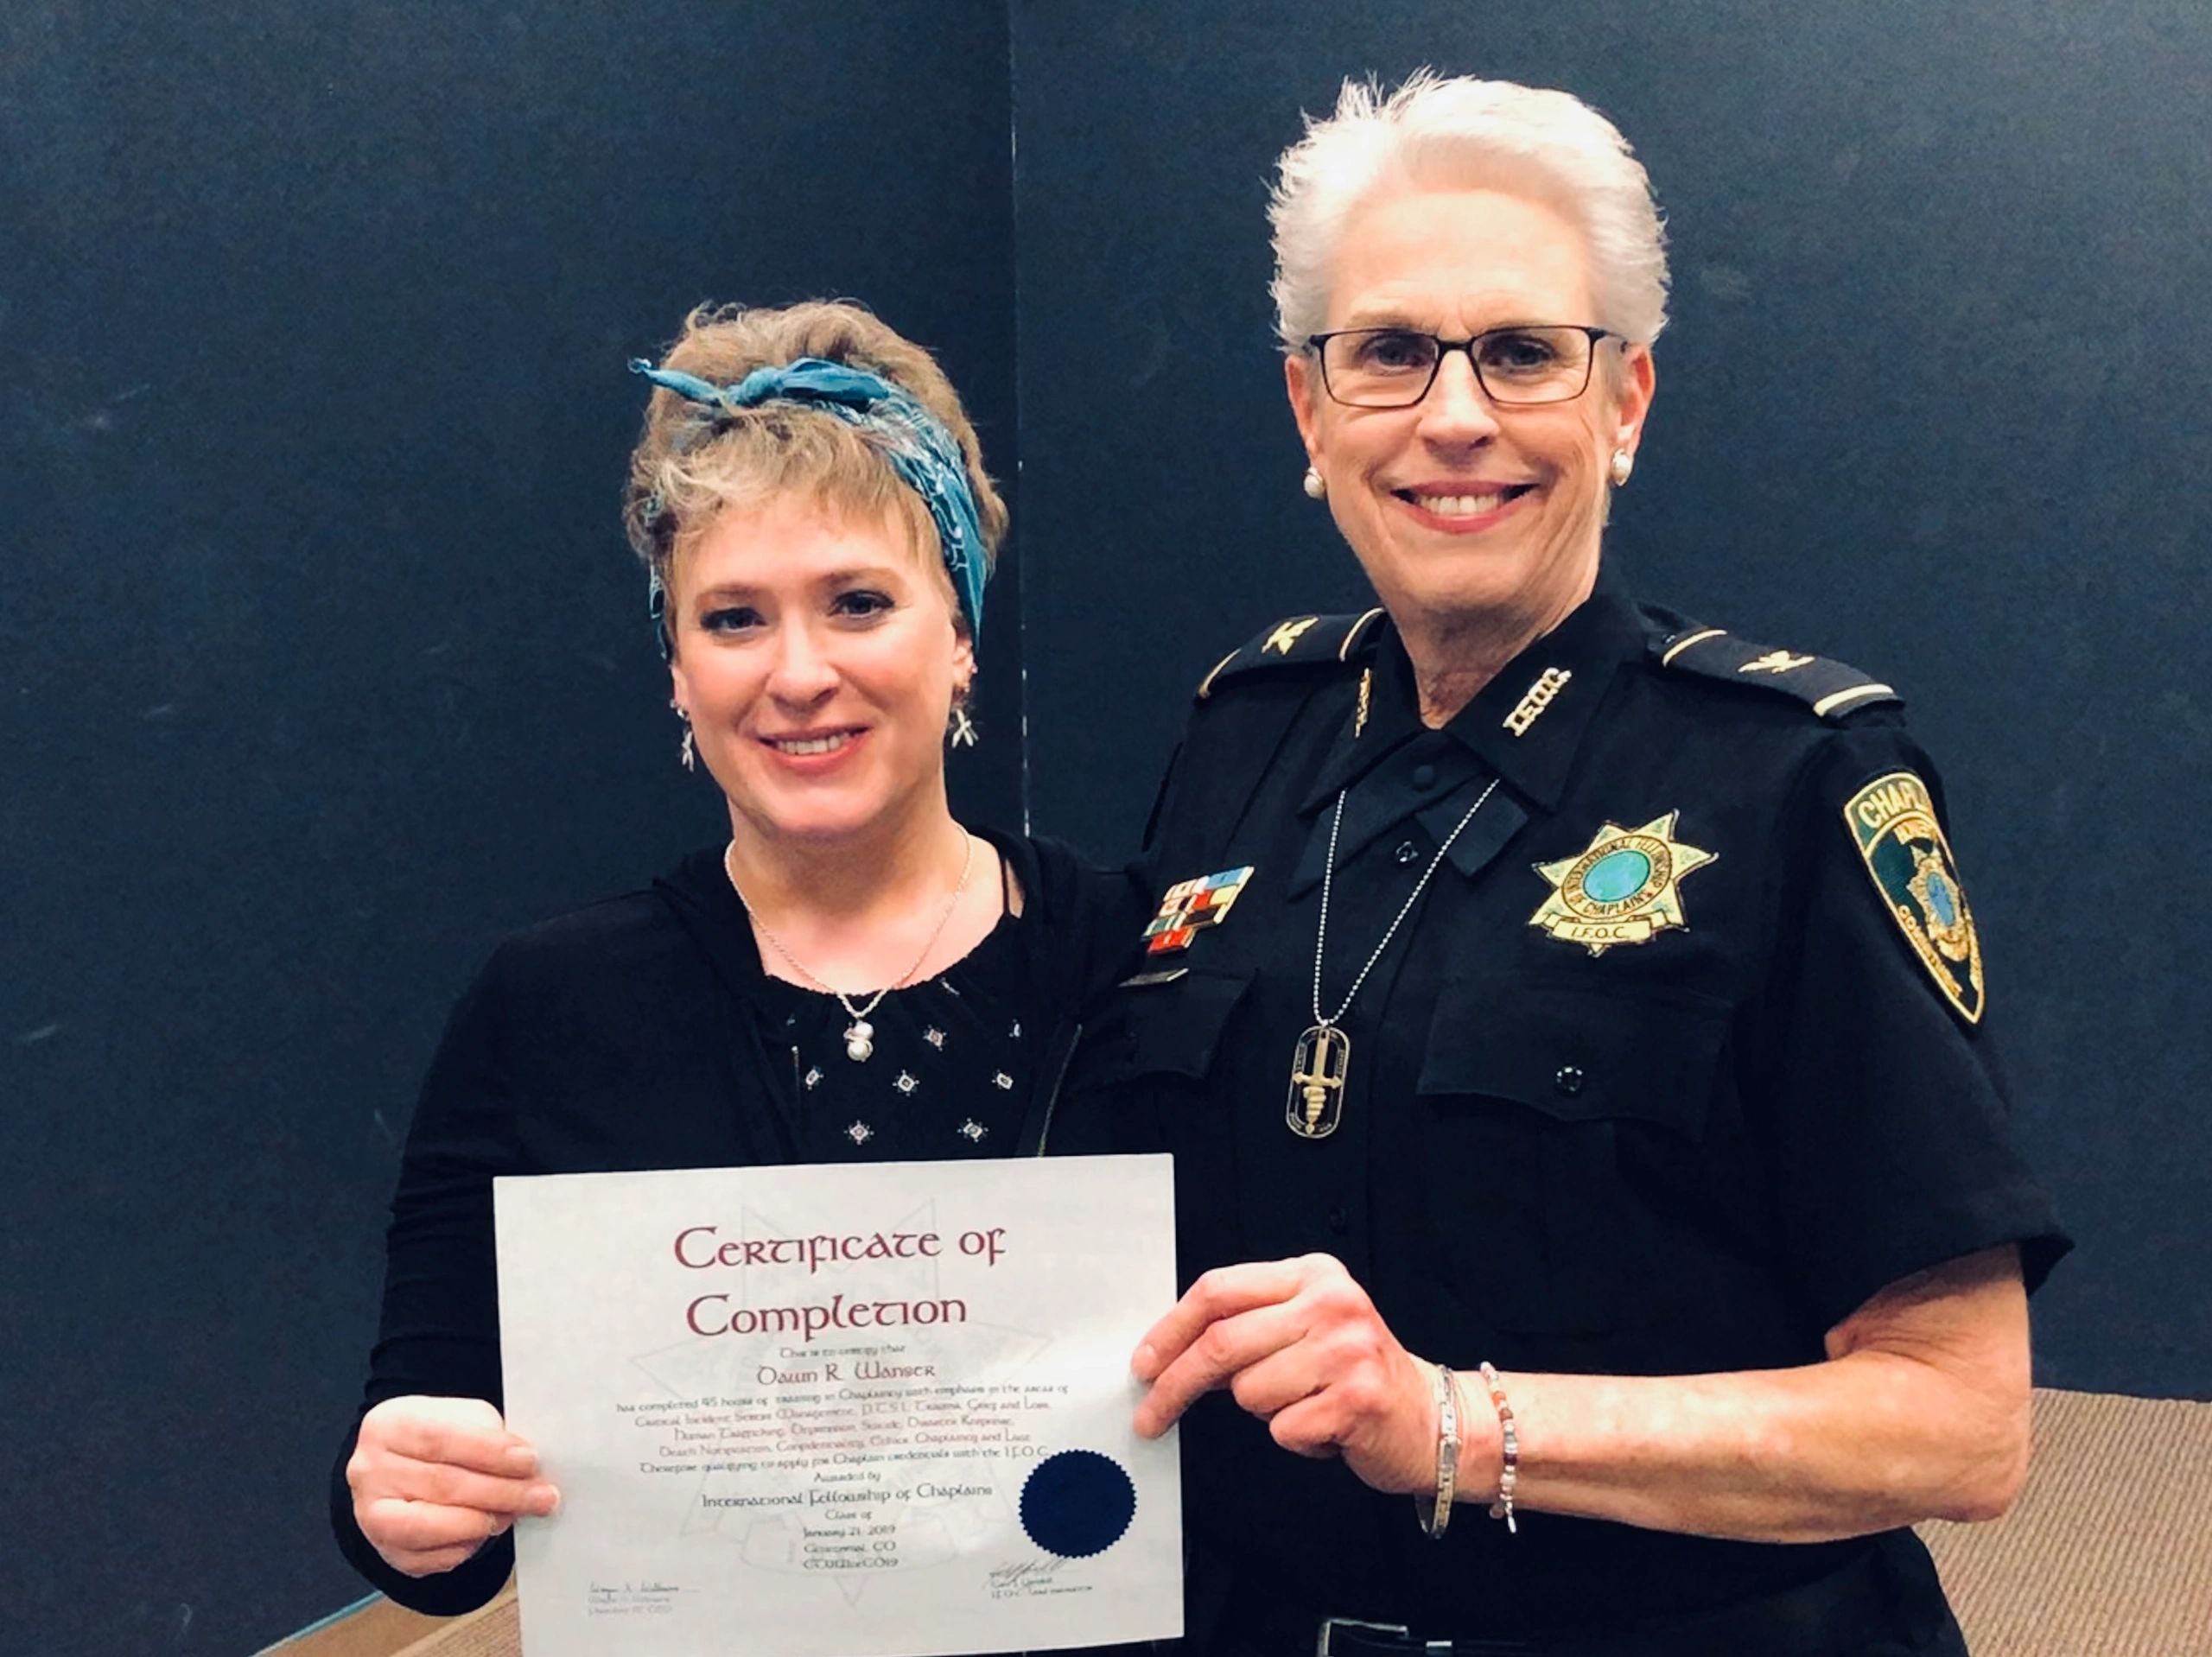 Dawn Wanser received her Chaplaincy License in March of 2019 through the International Fellowship of